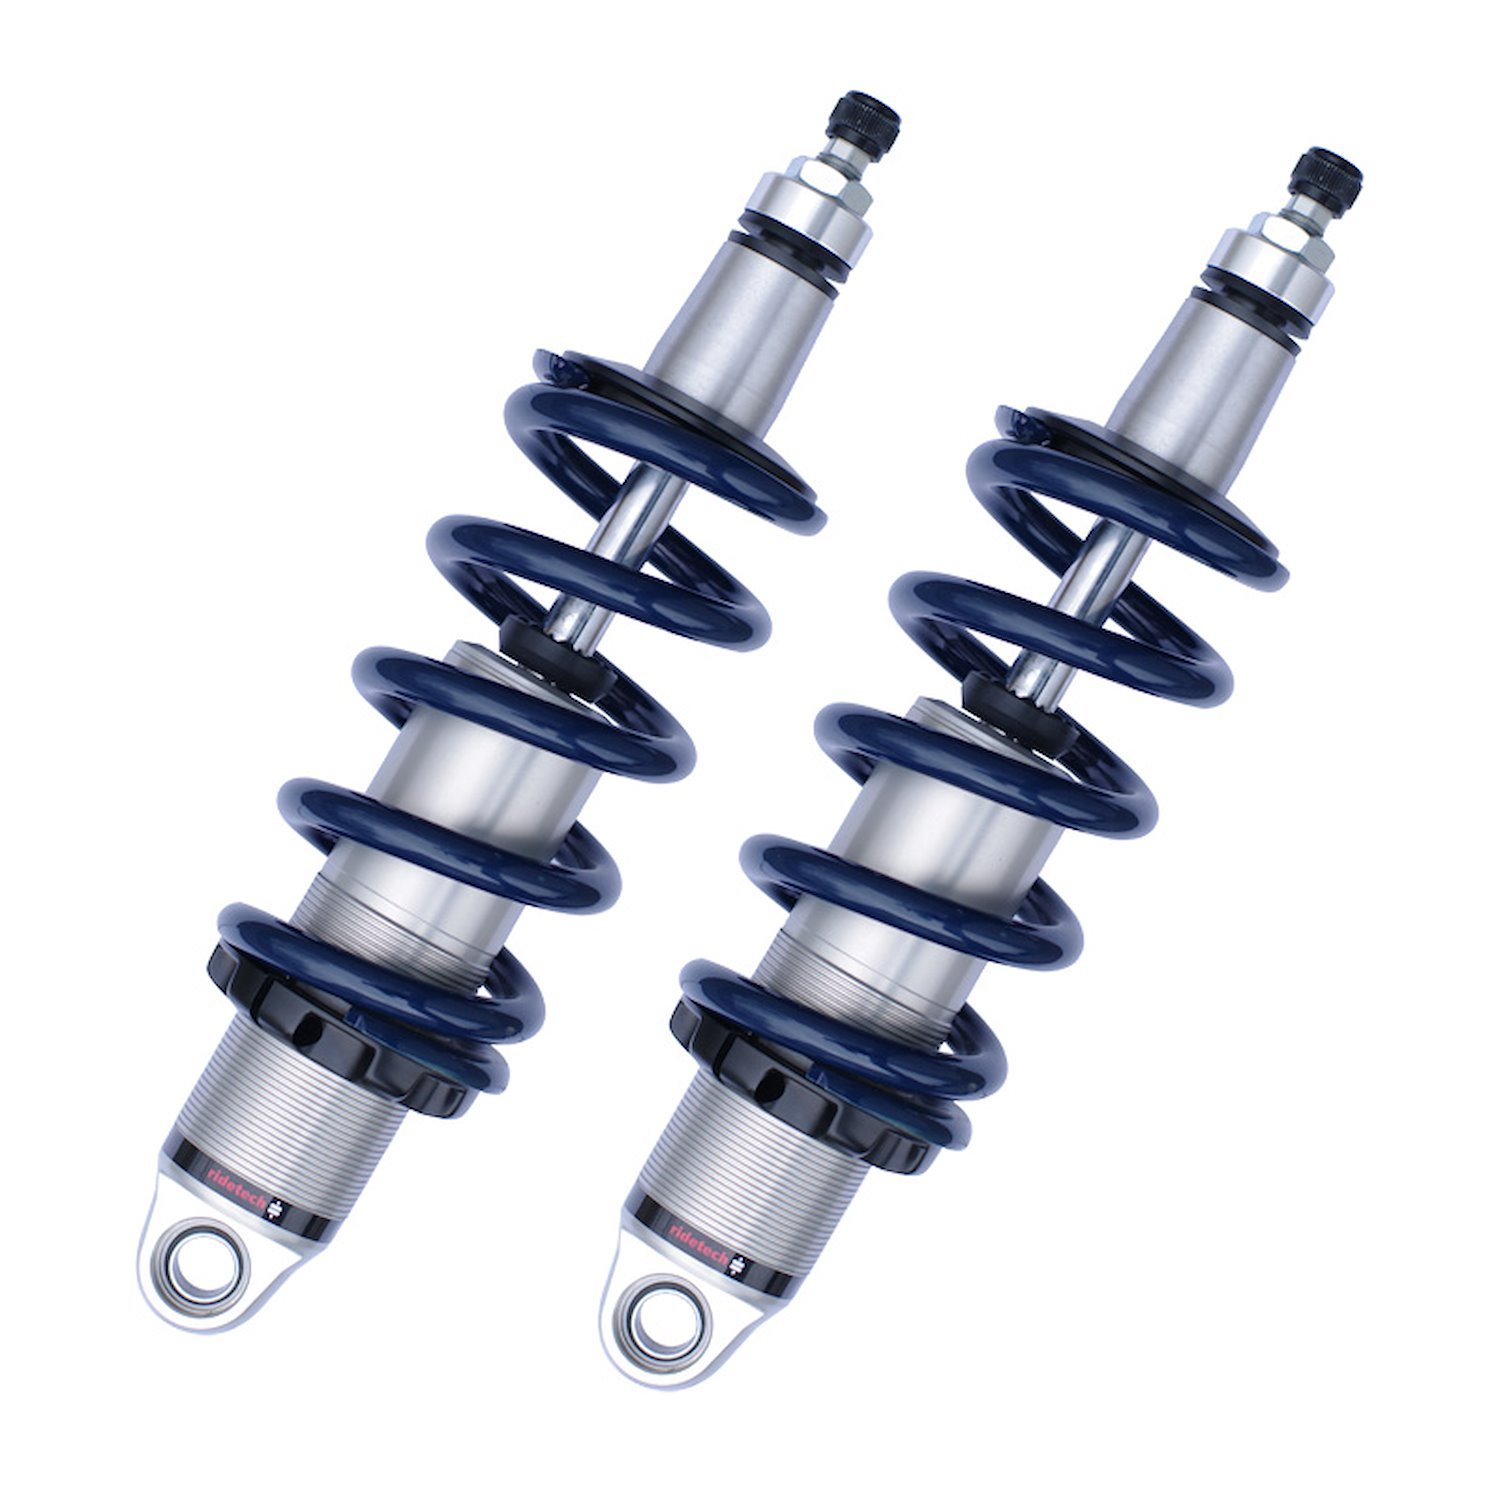 HQ Series front CoilOvers for 60-64 Galaxie includes springs. Sold as pair.